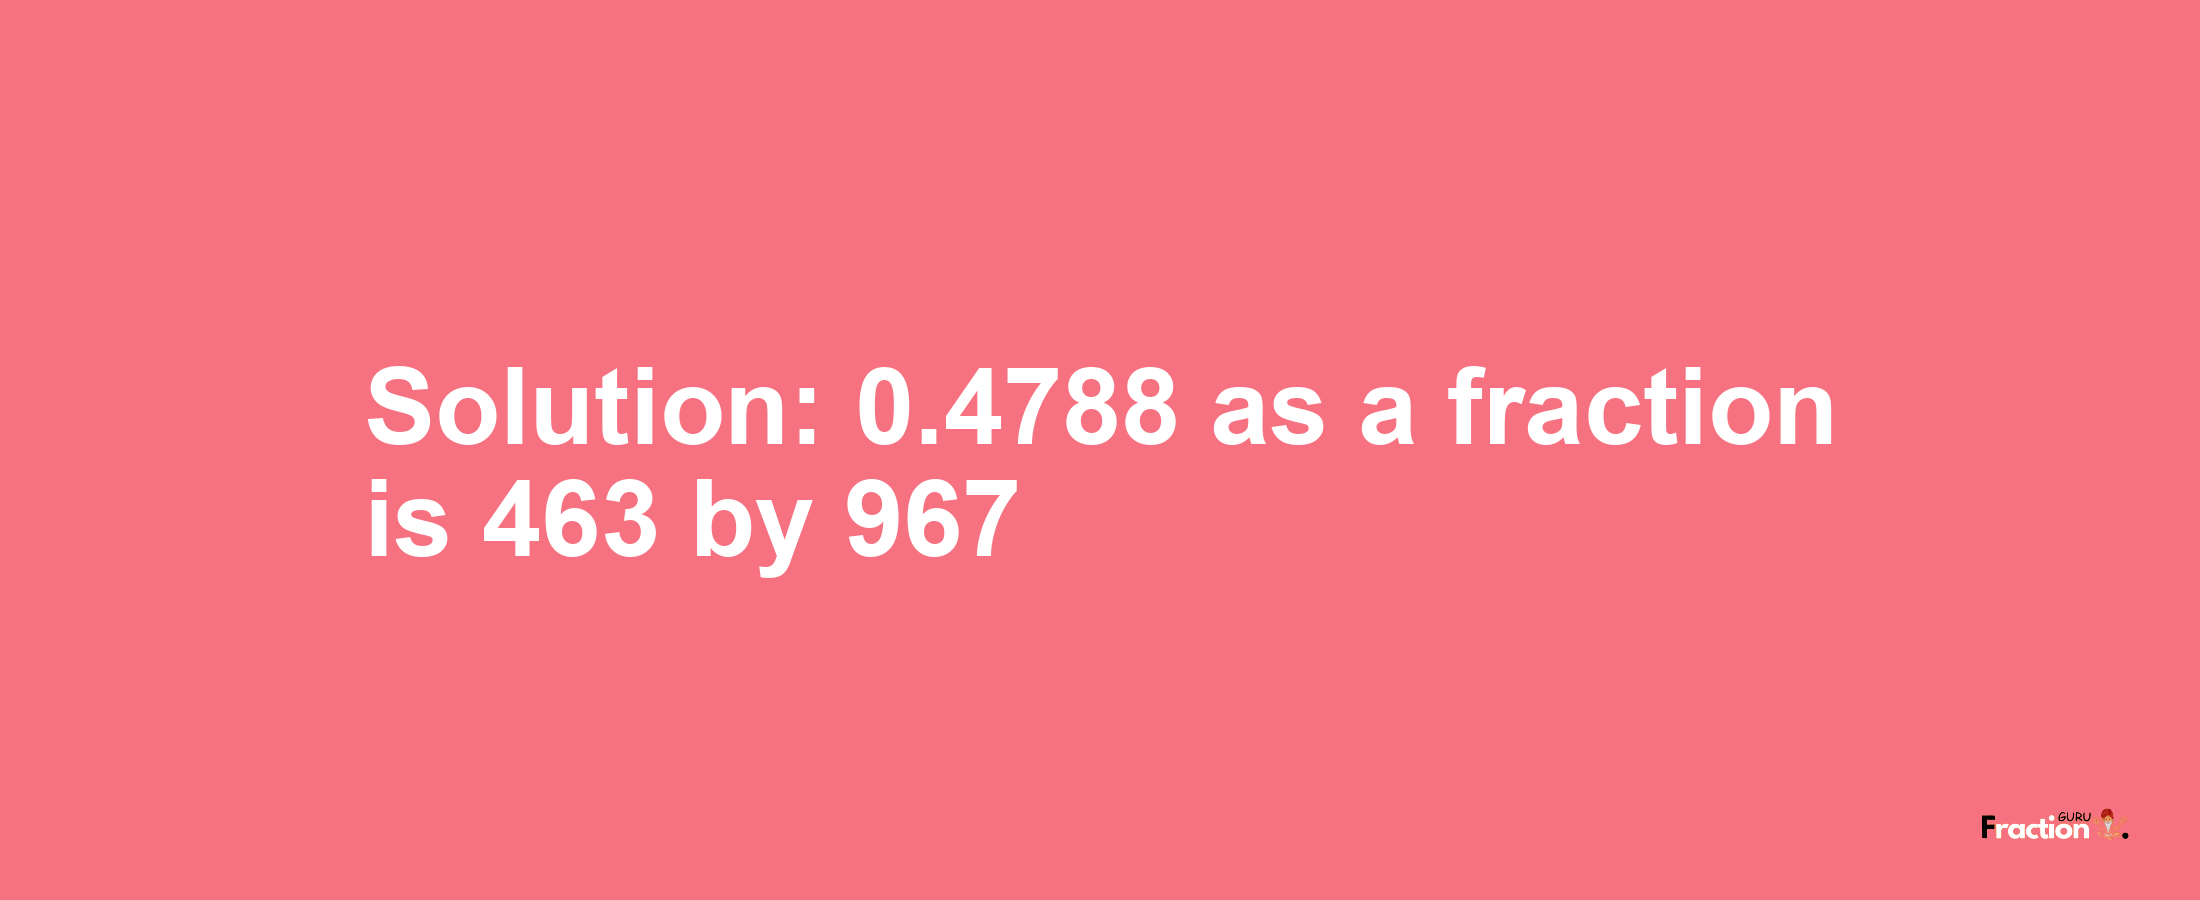 Solution:0.4788 as a fraction is 463/967